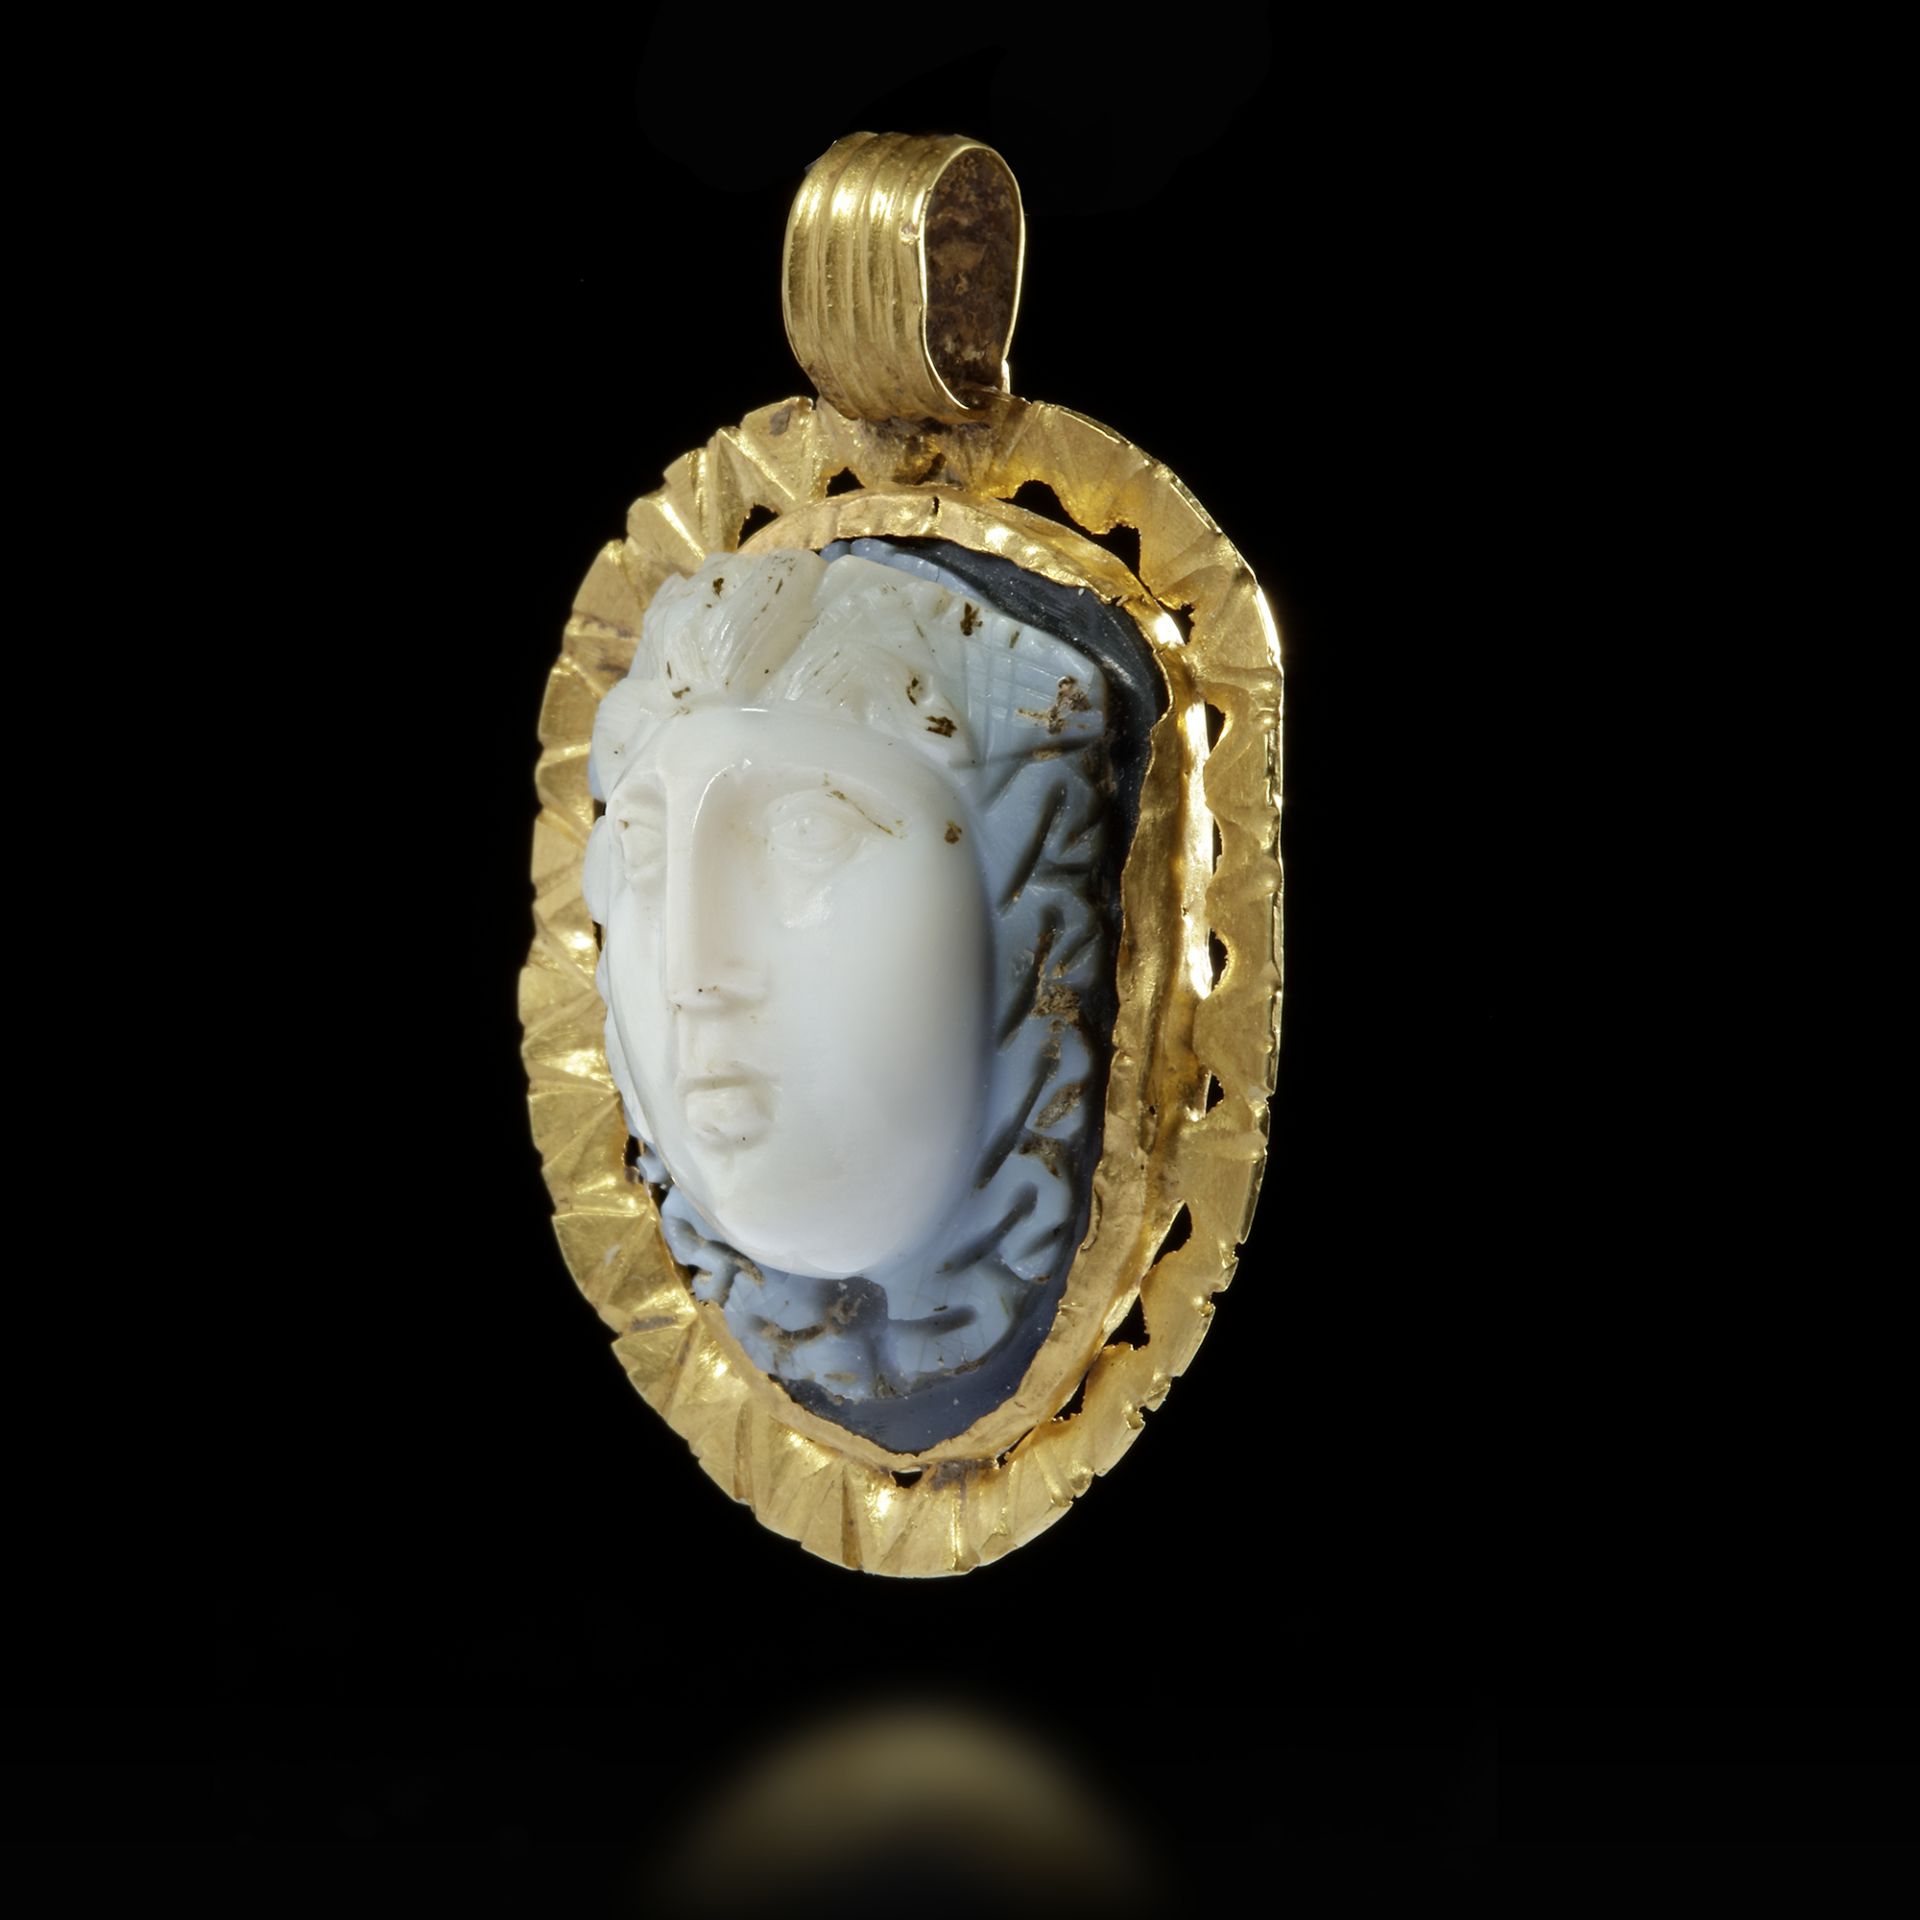 A LARGE CAMEO OF MEDUSA MOUNTED IN A GOLD FRAME, 3RD CENTURY AD - Bild 2 aus 4